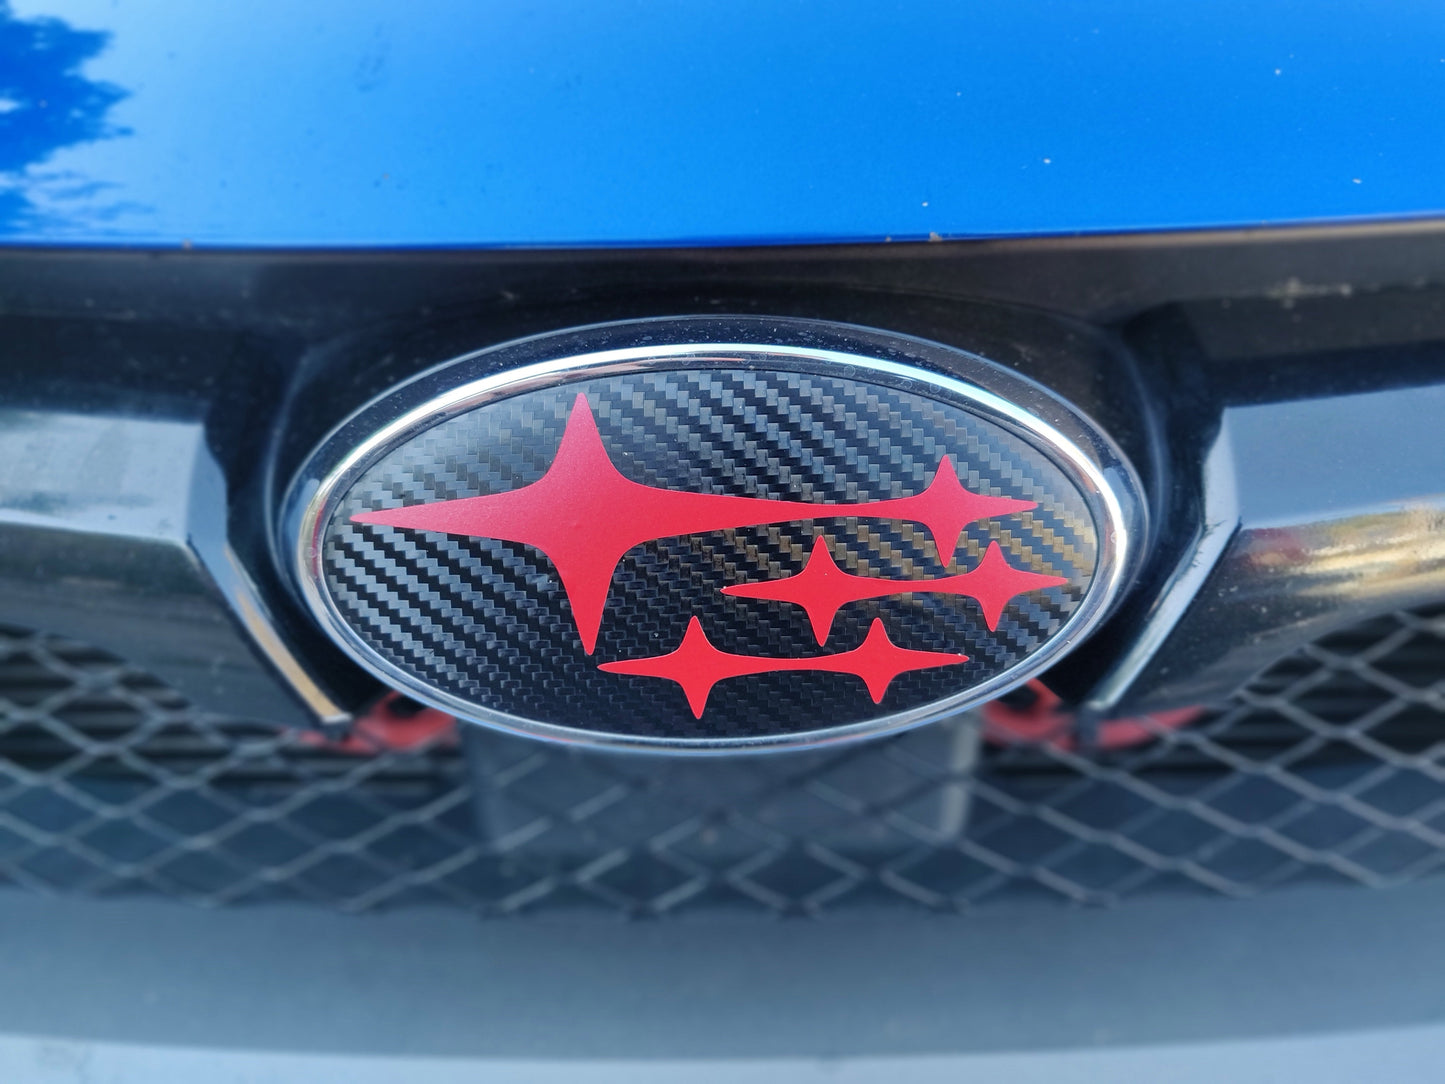 2019-2021 Forester Emblem Overlay DECALS Compatible with Subaru Forester | Front & Rear Set